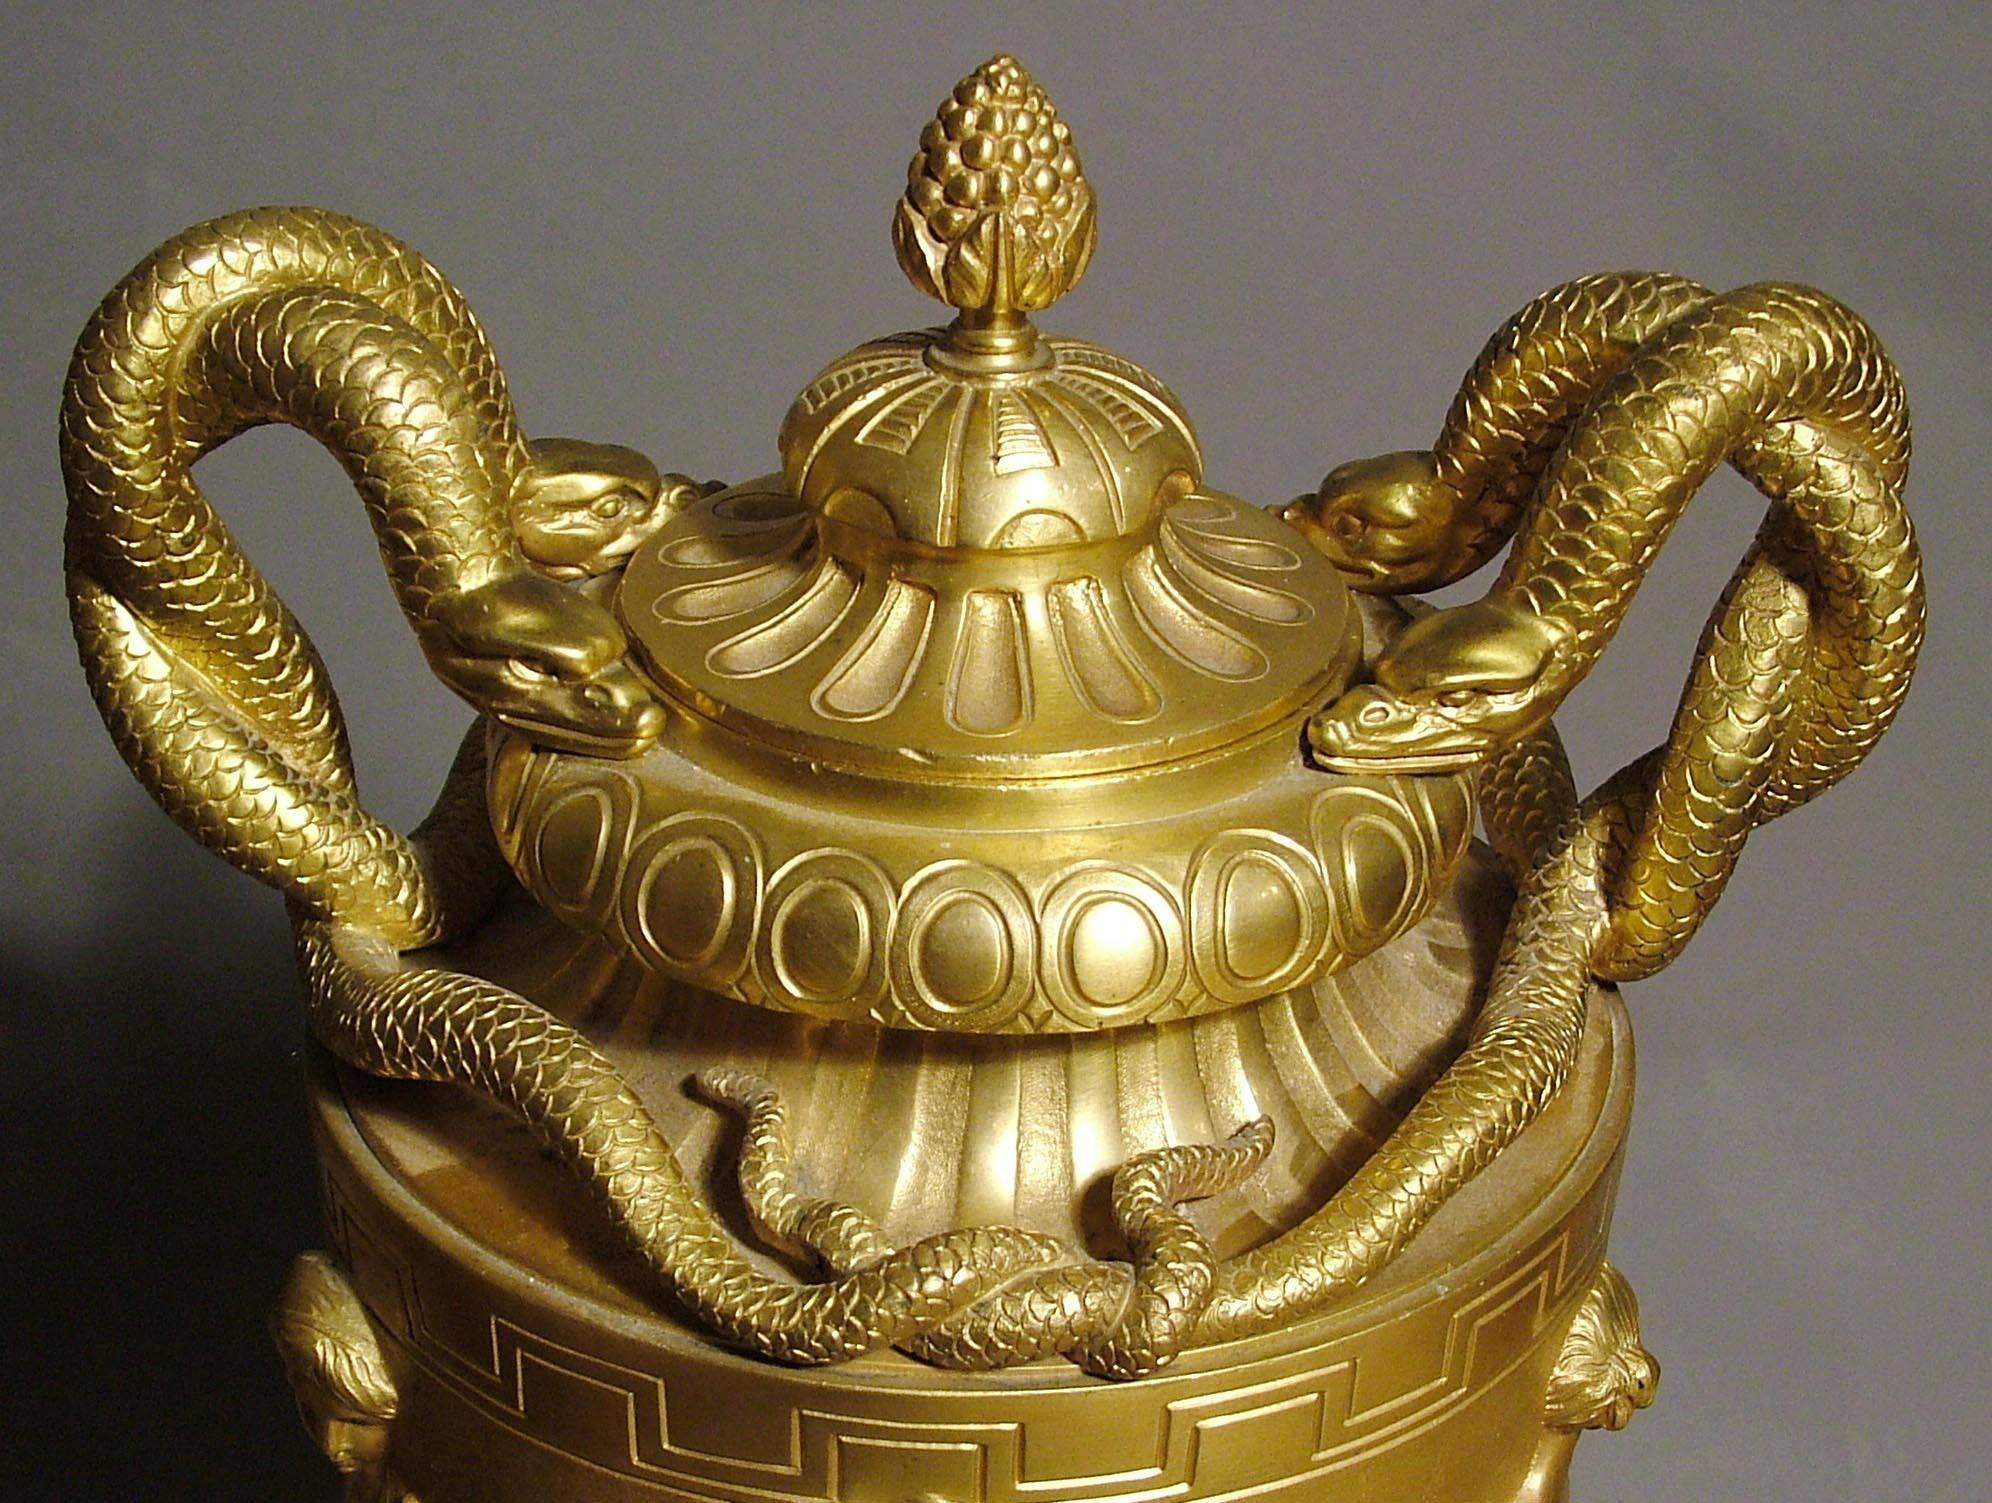 A fine pair of urns in the manner of Clodion.

Constructed in finely planished gilt bronze, rising from octagonal bases; of waisted baluster form, with entrelacs of laurel leaf bands; the dancing Grecian nymphs to the bodies of the vases known as